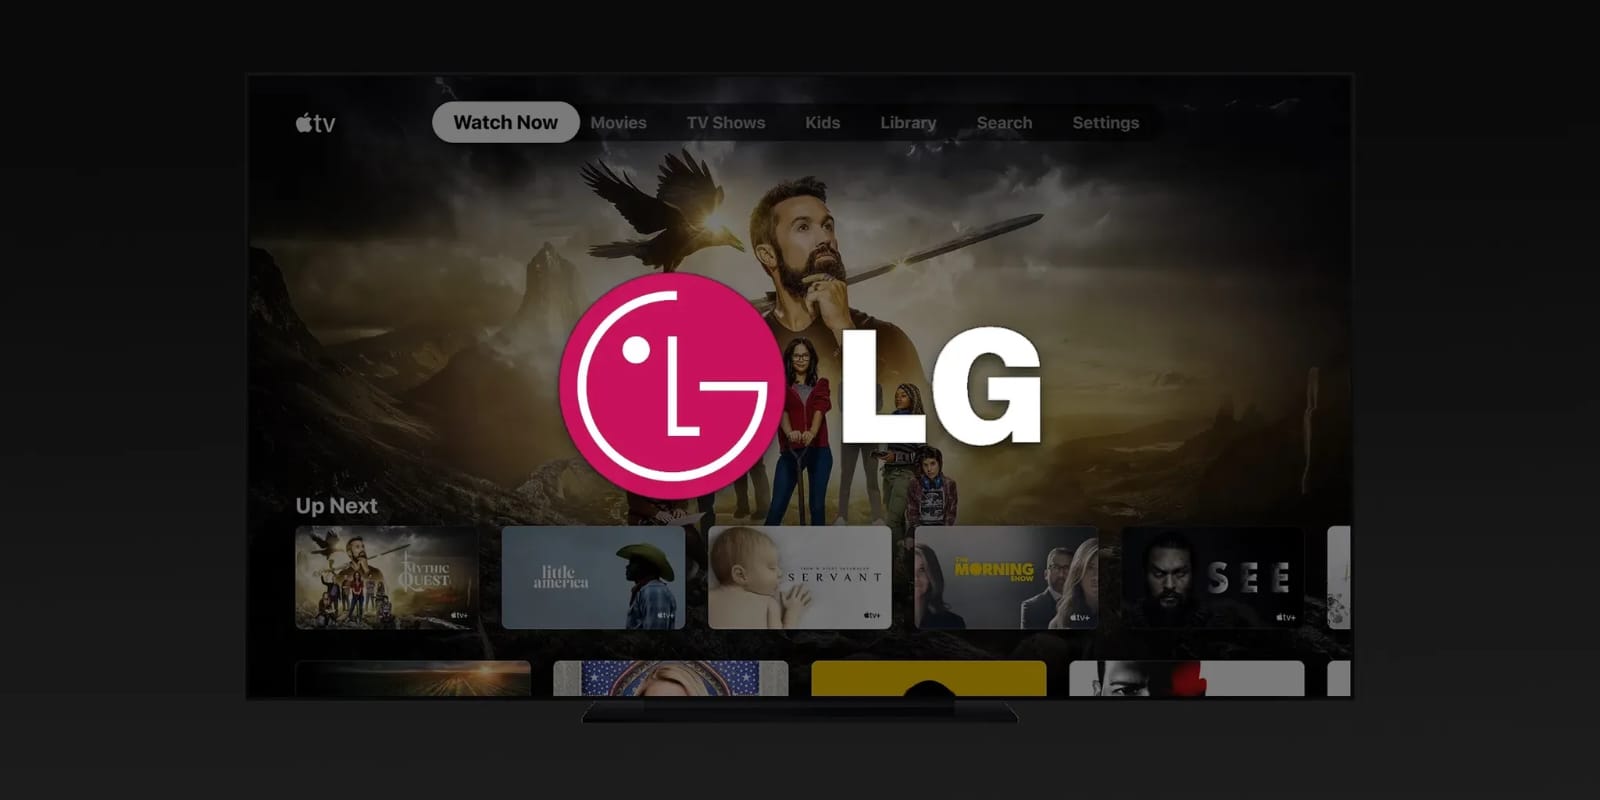 How To Troubleshoot Common Problems of LG TV?